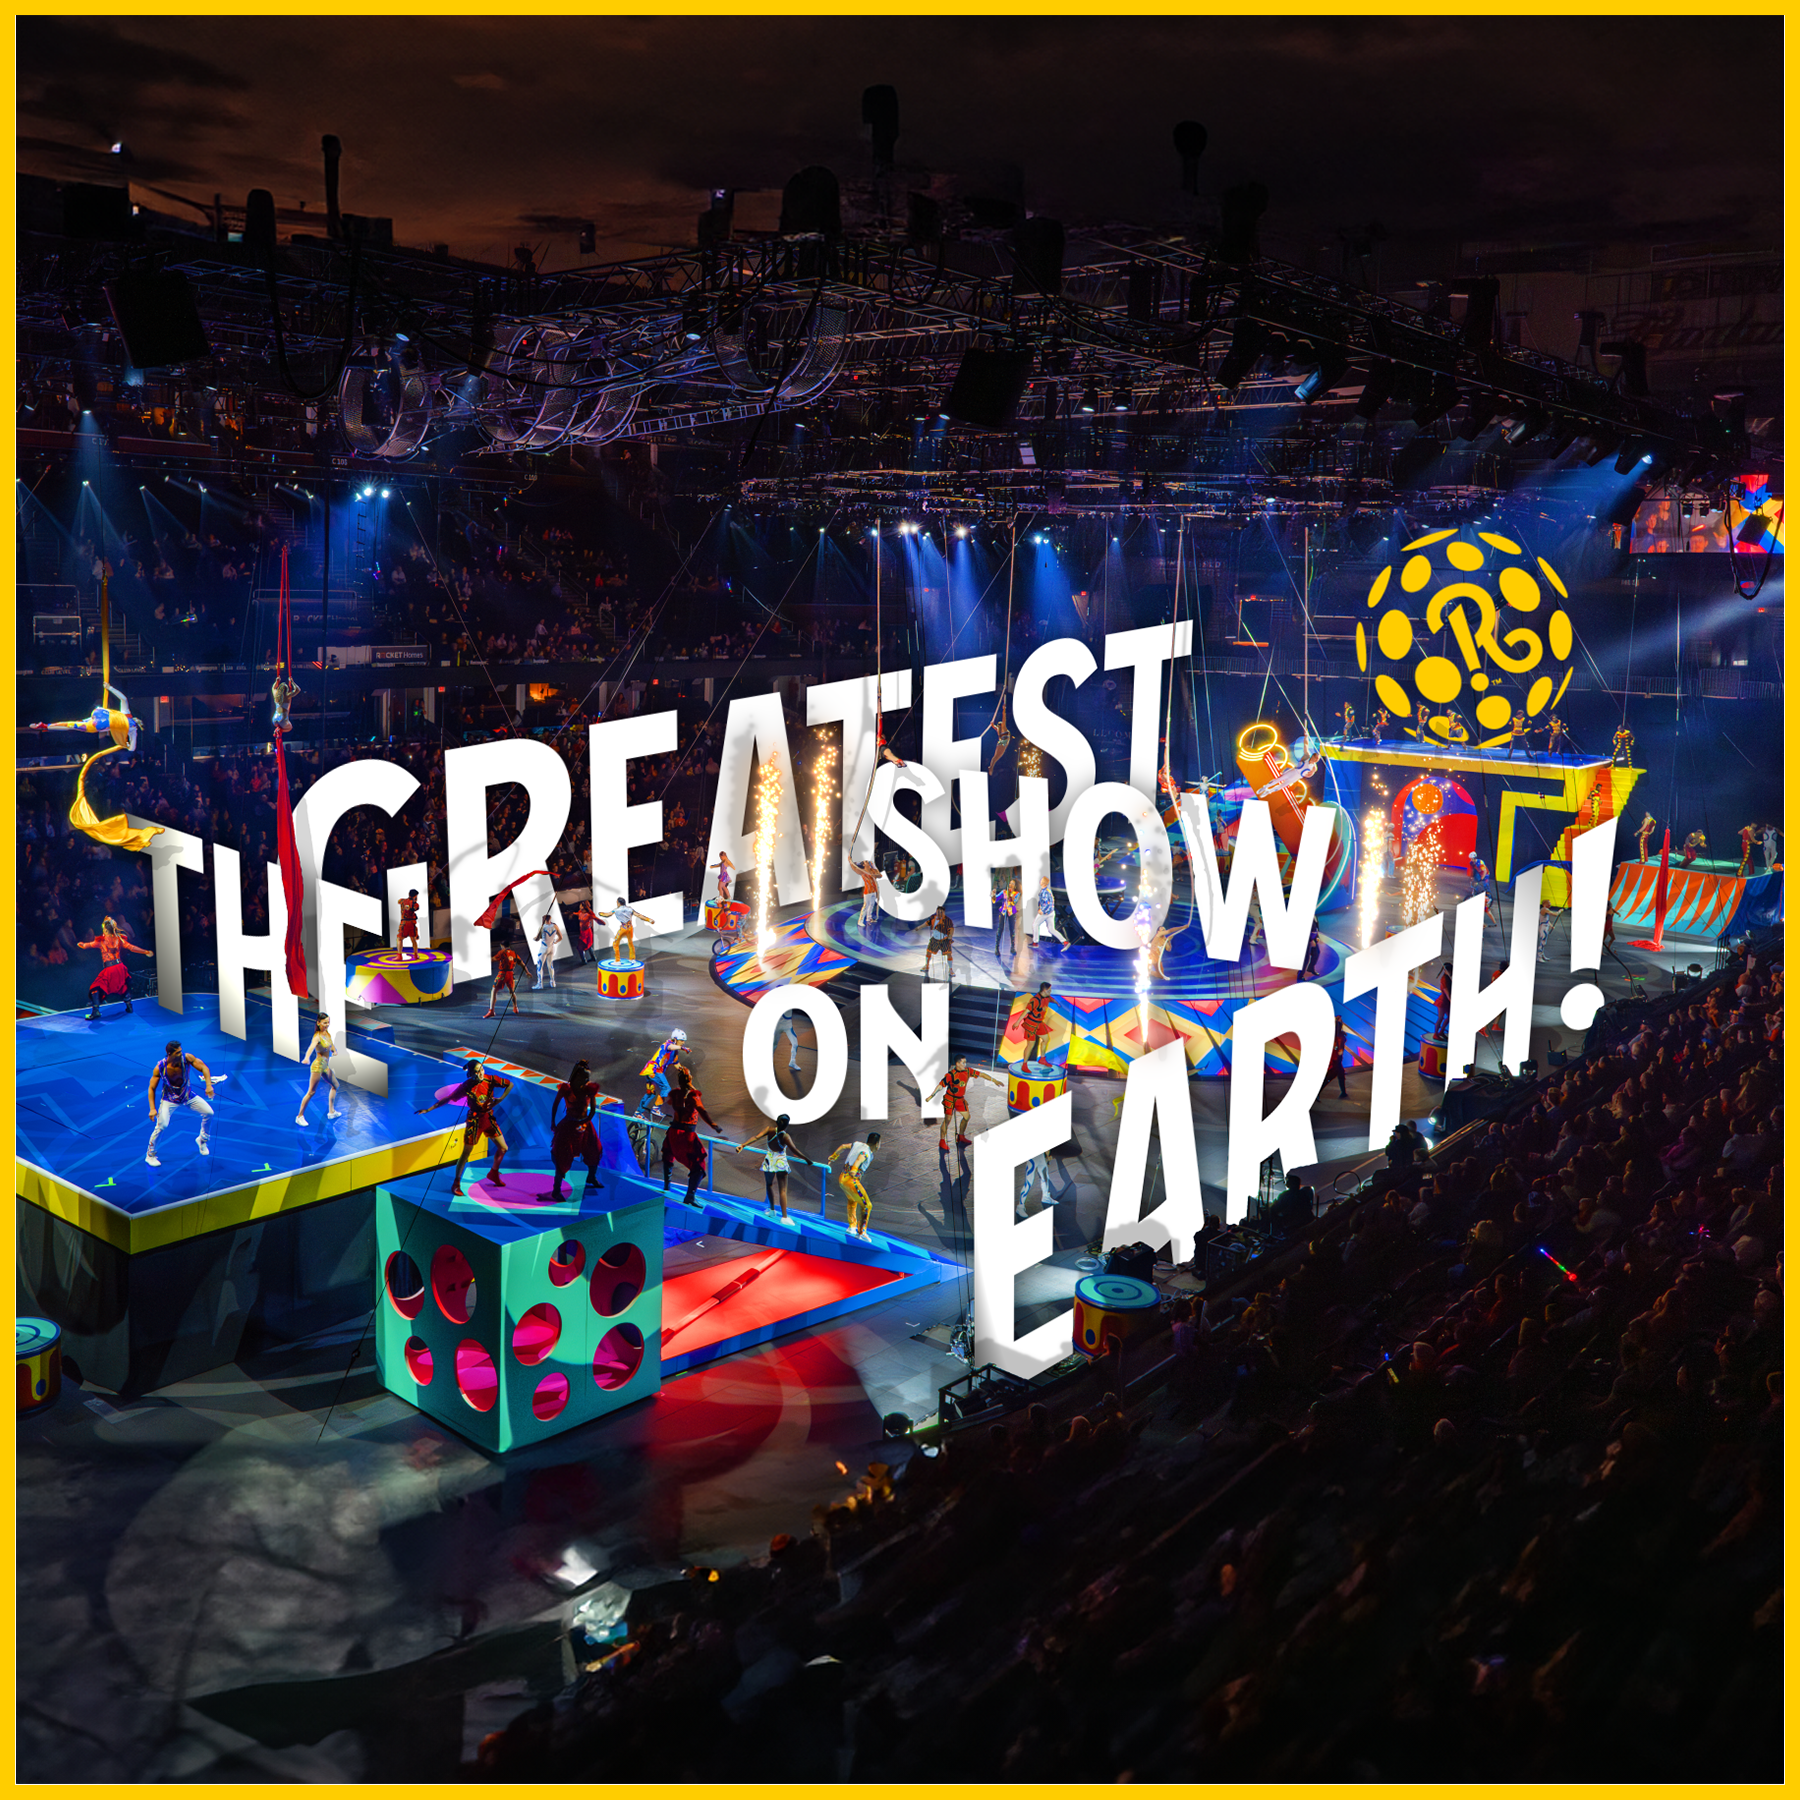 Audience view of Ringling Bros. And Barnum & Bailey